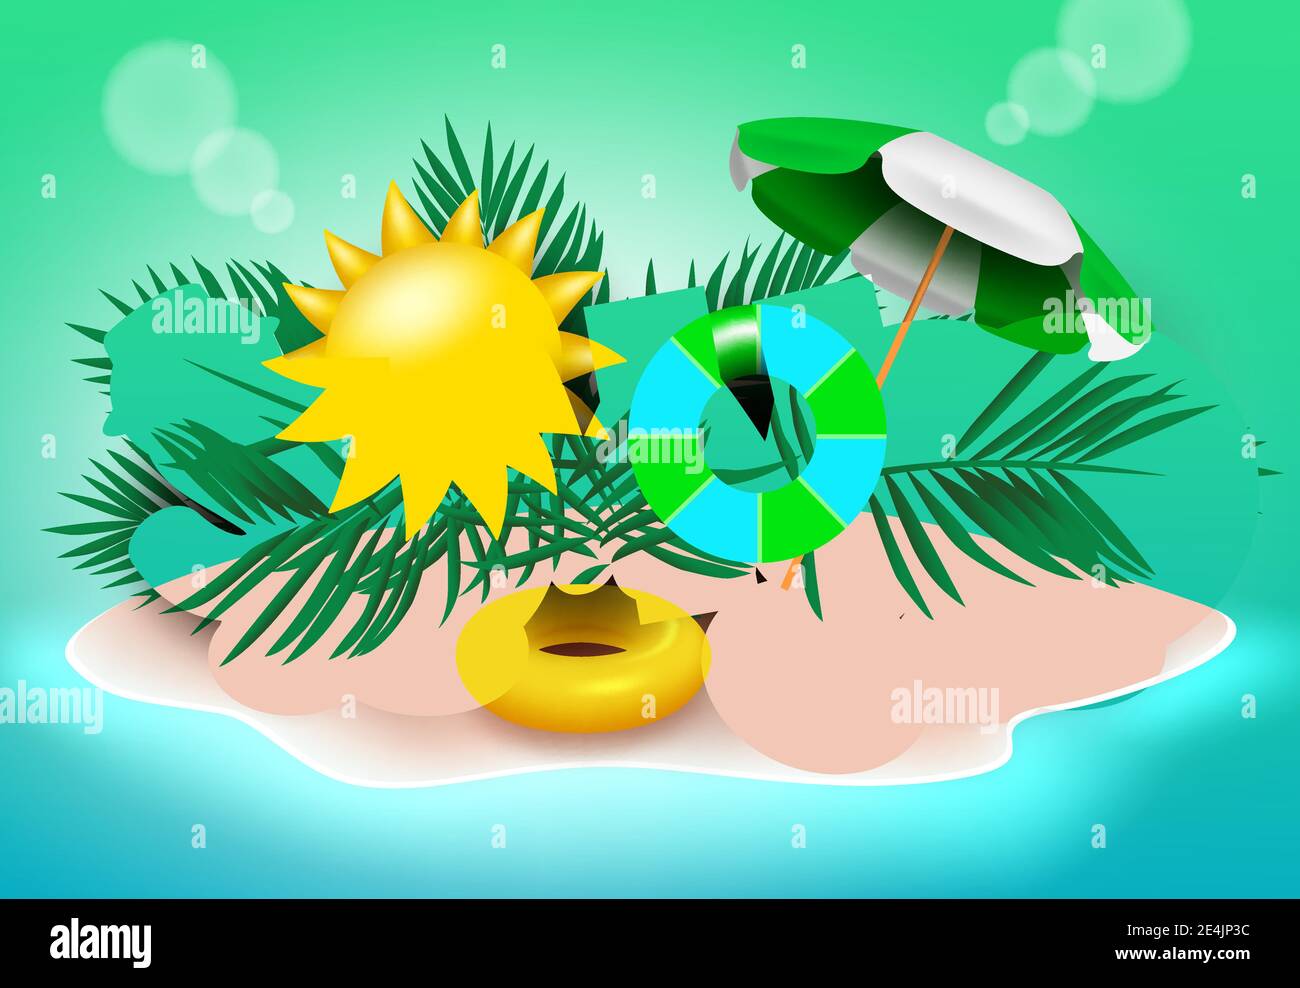 Summer vector banner design. Summer text in beach island background with sun and umbrella elements for fun and enjoy holiday season. Stock Vector